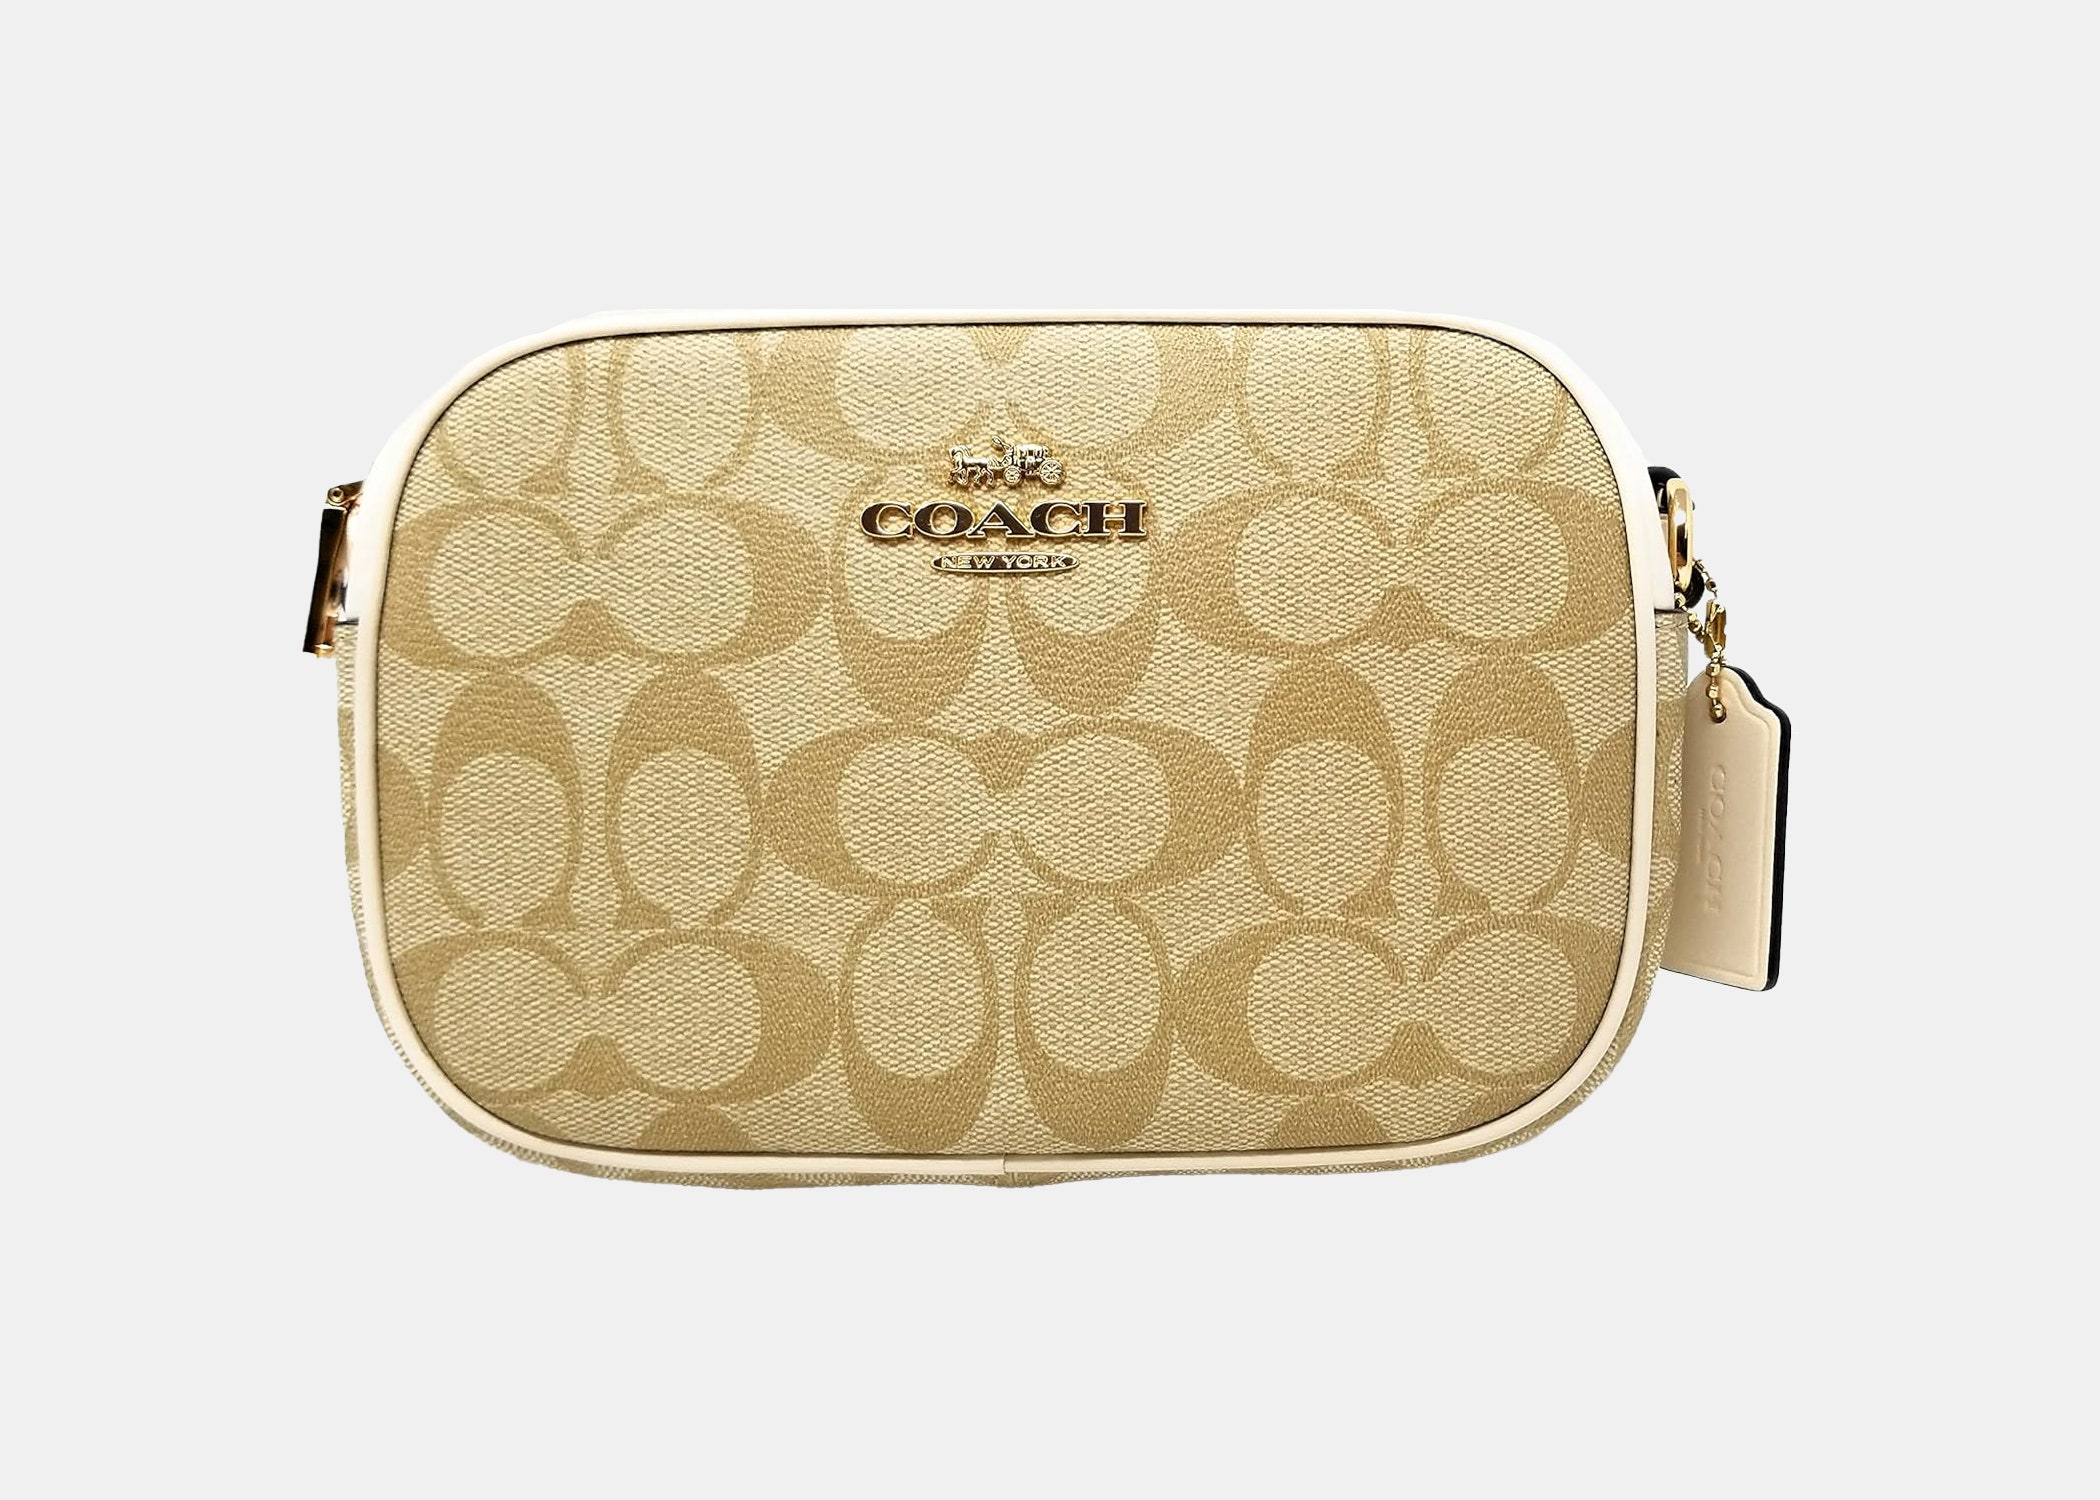 <p><strong>Best bag for bringing back your Y2K era</strong></p> <p>Coach is a classic for a reason, and while it epitomizes Y2K style, you can rock it with even more flair today, evoking nostalgia. The brand’s Jamie Camera crossbody camera bag is 9.5" x 7", making it an ideal size for a small device that you want to tote to a party—or have on your hip while you stroll an urban street abroad. It’s made of smooth, creamy leather and lined with fabric. Chic and functional.</p> <p><strong>Noteworthy features:</strong> Credit card slots, adjustable strap</p> $123, Amazon. <a href="https://www.amazon.com/COACH-Jamie-Camera-Signature-Canvas/dp/B0BGDDH24F">Get it now!</a><p>Sign up to receive the latest news, expert tips, and inspiration on all things travel</p><a href="https://www.cntraveler.com/newsletter/the-daily?sourceCode=msnsend">Inspire Me</a>